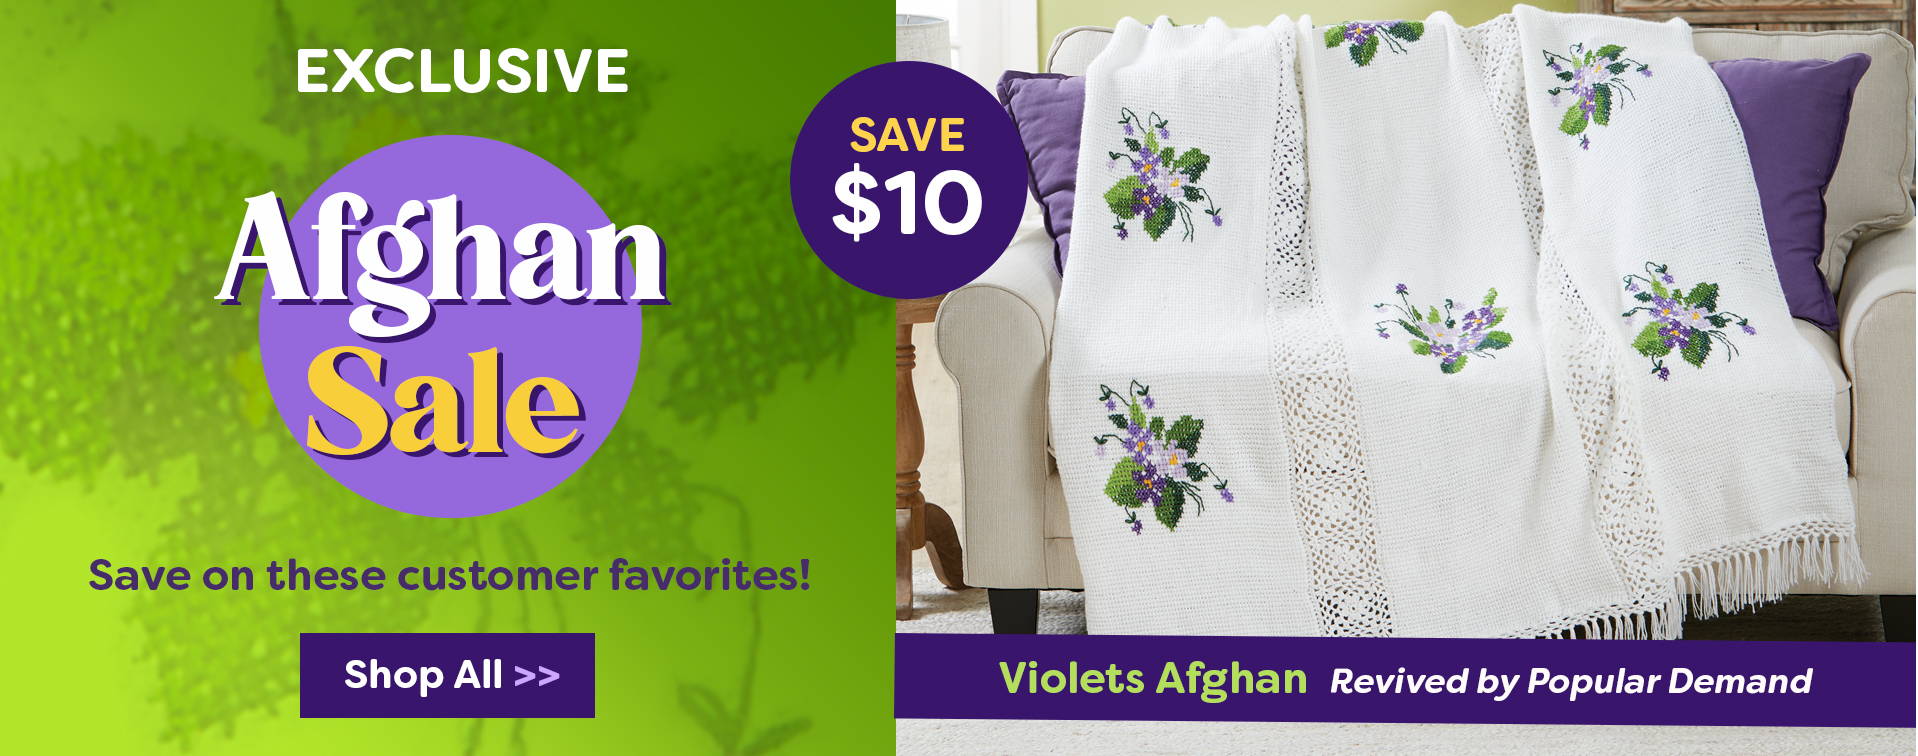 Save $10 - Exclusive Afghan Sale so you can save on your favorite. Image: Violets Afghan.